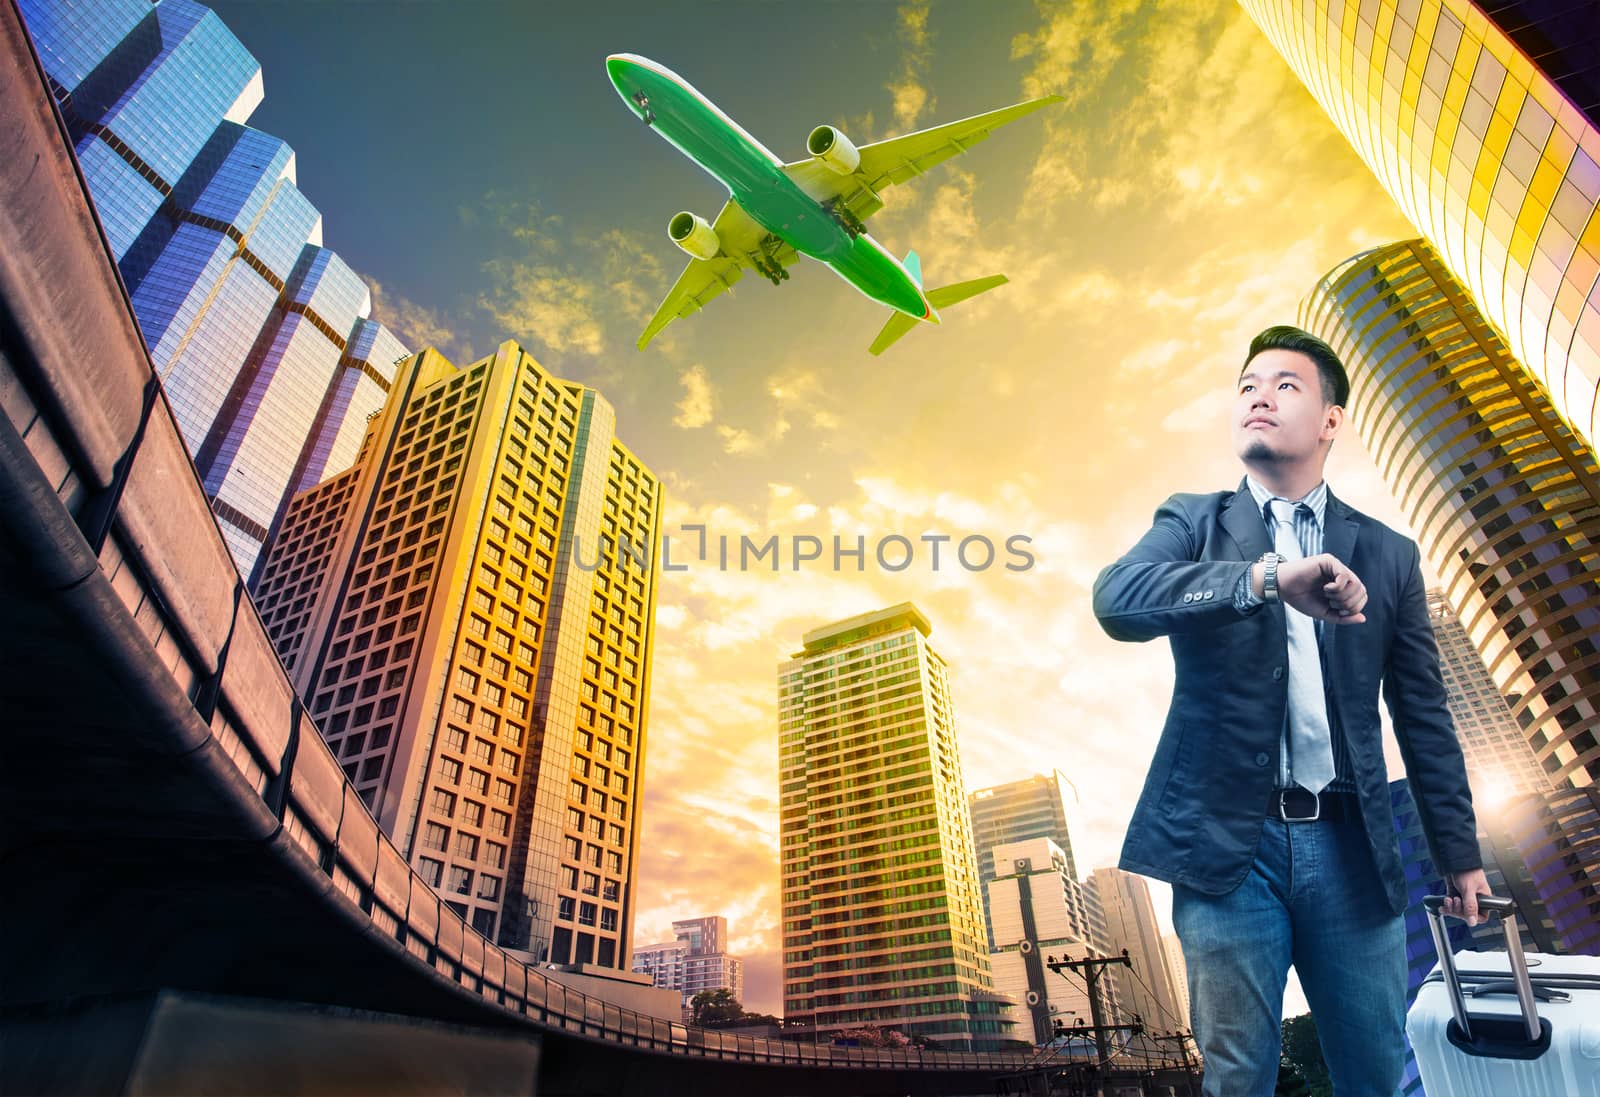 young business man and belonging luggage standing against building urban scene looking to sky with passenger jet plane flying above use for people in traveling theme